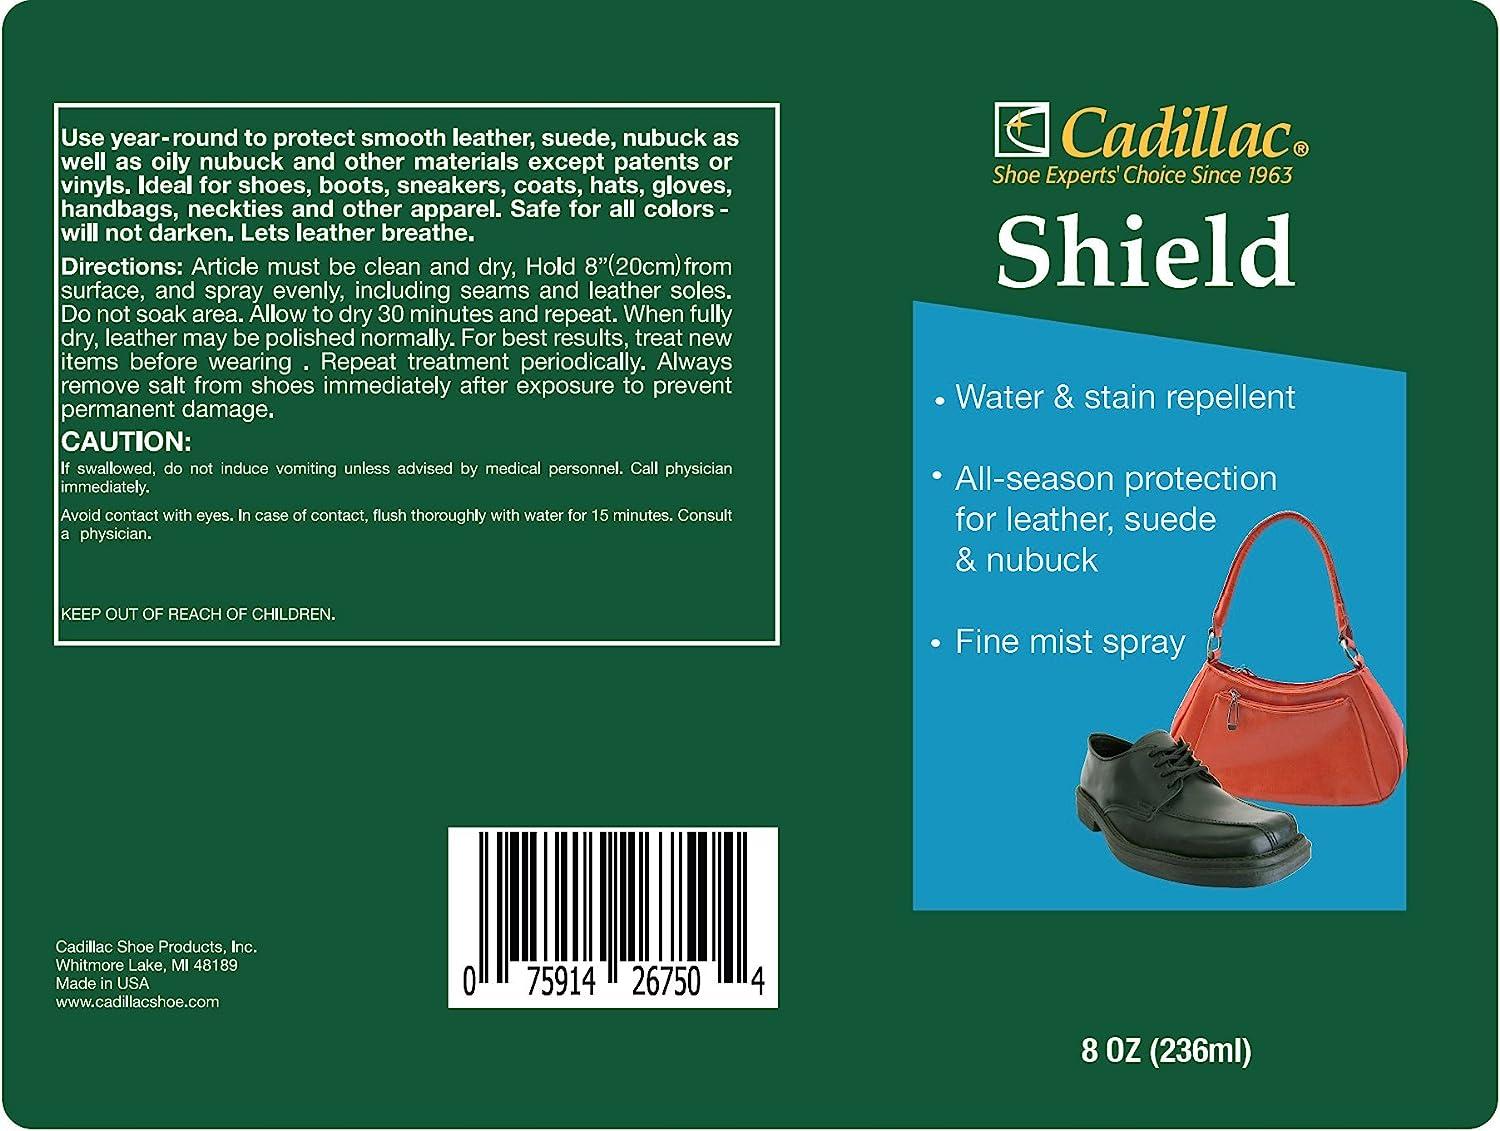 Cadillac Shield Water and Stain - Leather and Fabric Protector Spray -  Great for Shoes - 5.5 oz - Waterproof and Protect Suede, Leather, Nubuck